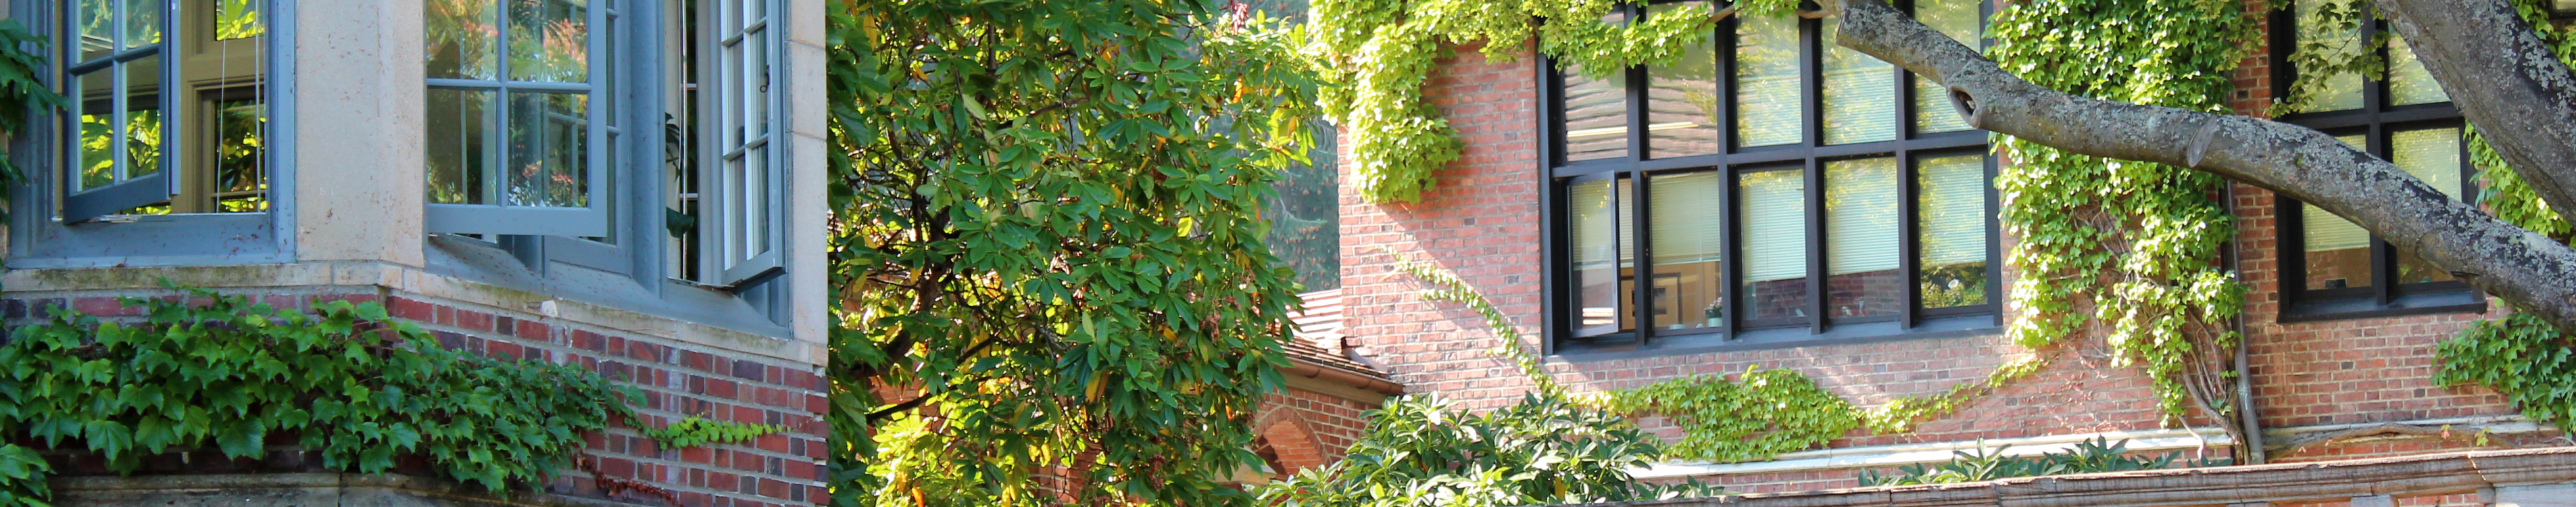 Bricks and ivy on campus buildings